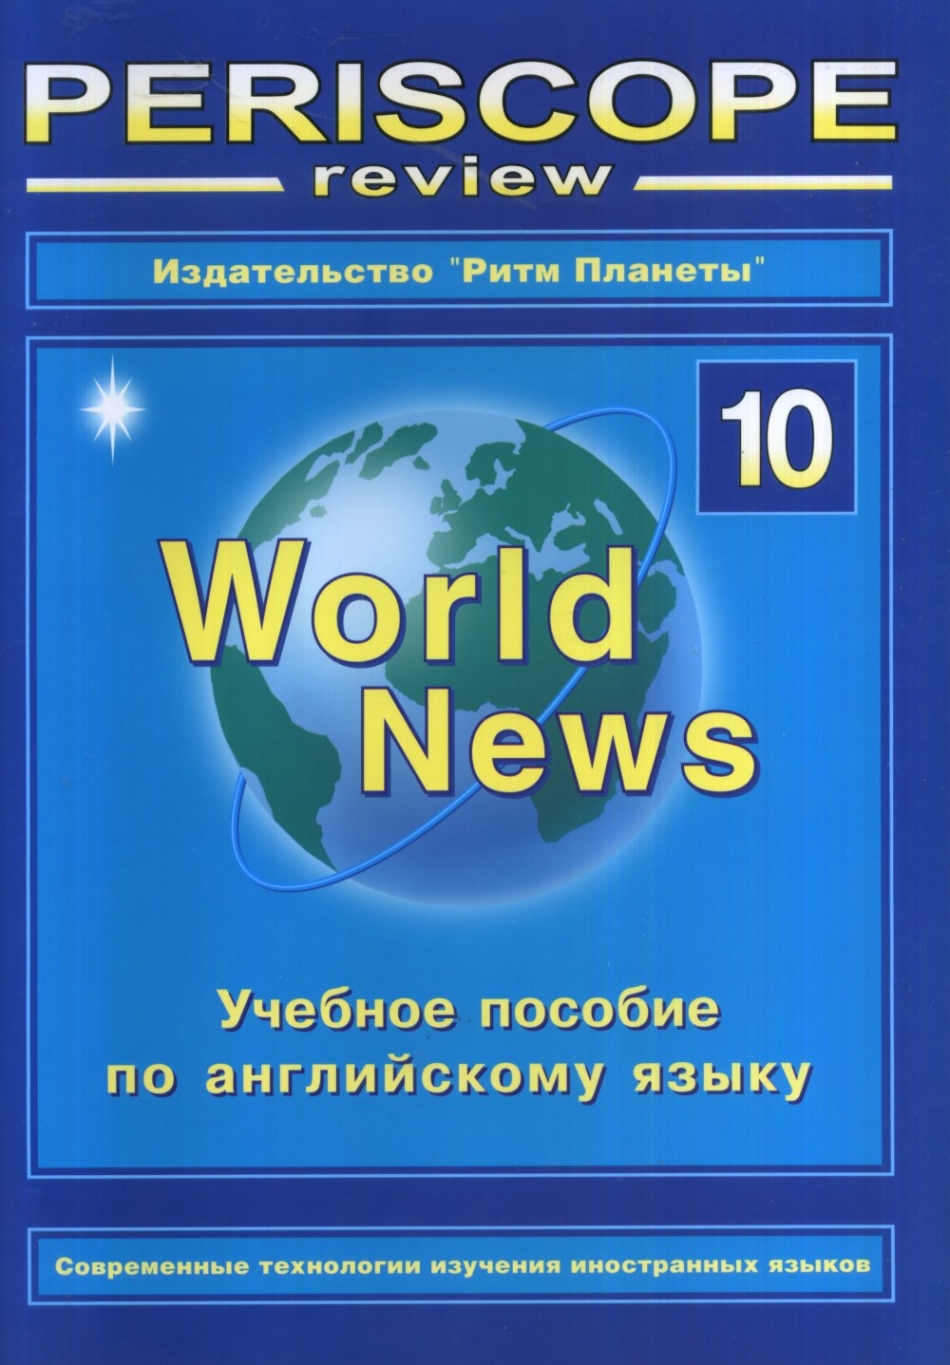  .. Periscope review.      World News  10.  